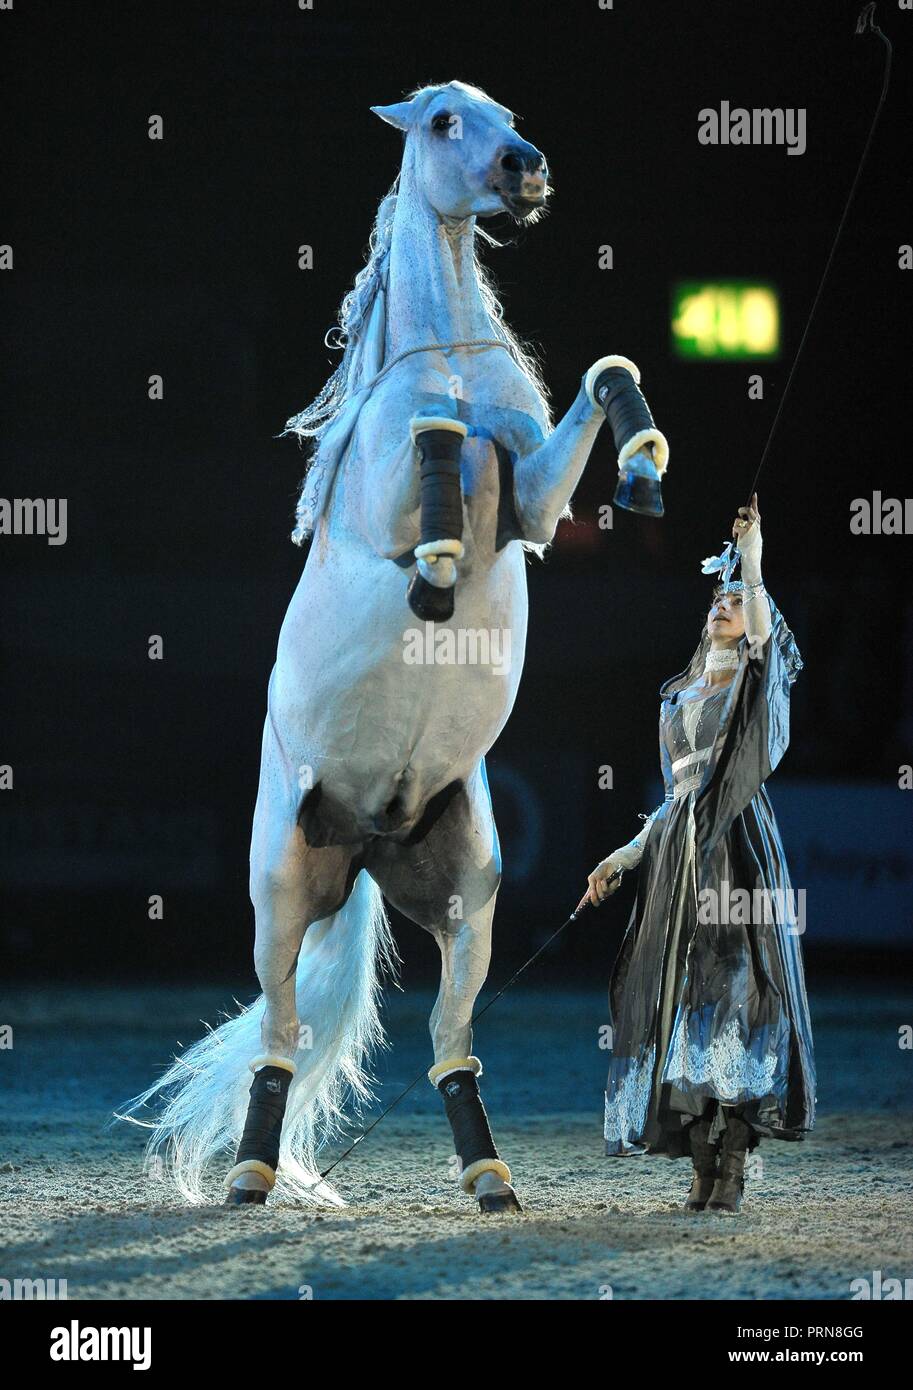 NEC Birmingham, UK. 3rd Oct 2018. Alizee Froment L'Espirit Equestre. Horse of the year show (HOYS). National Exhibition Centre (NEC). Birmingham. UK. 03/10/2018. Credit: Sport In Pictures/Alamy Live News Stock Photo